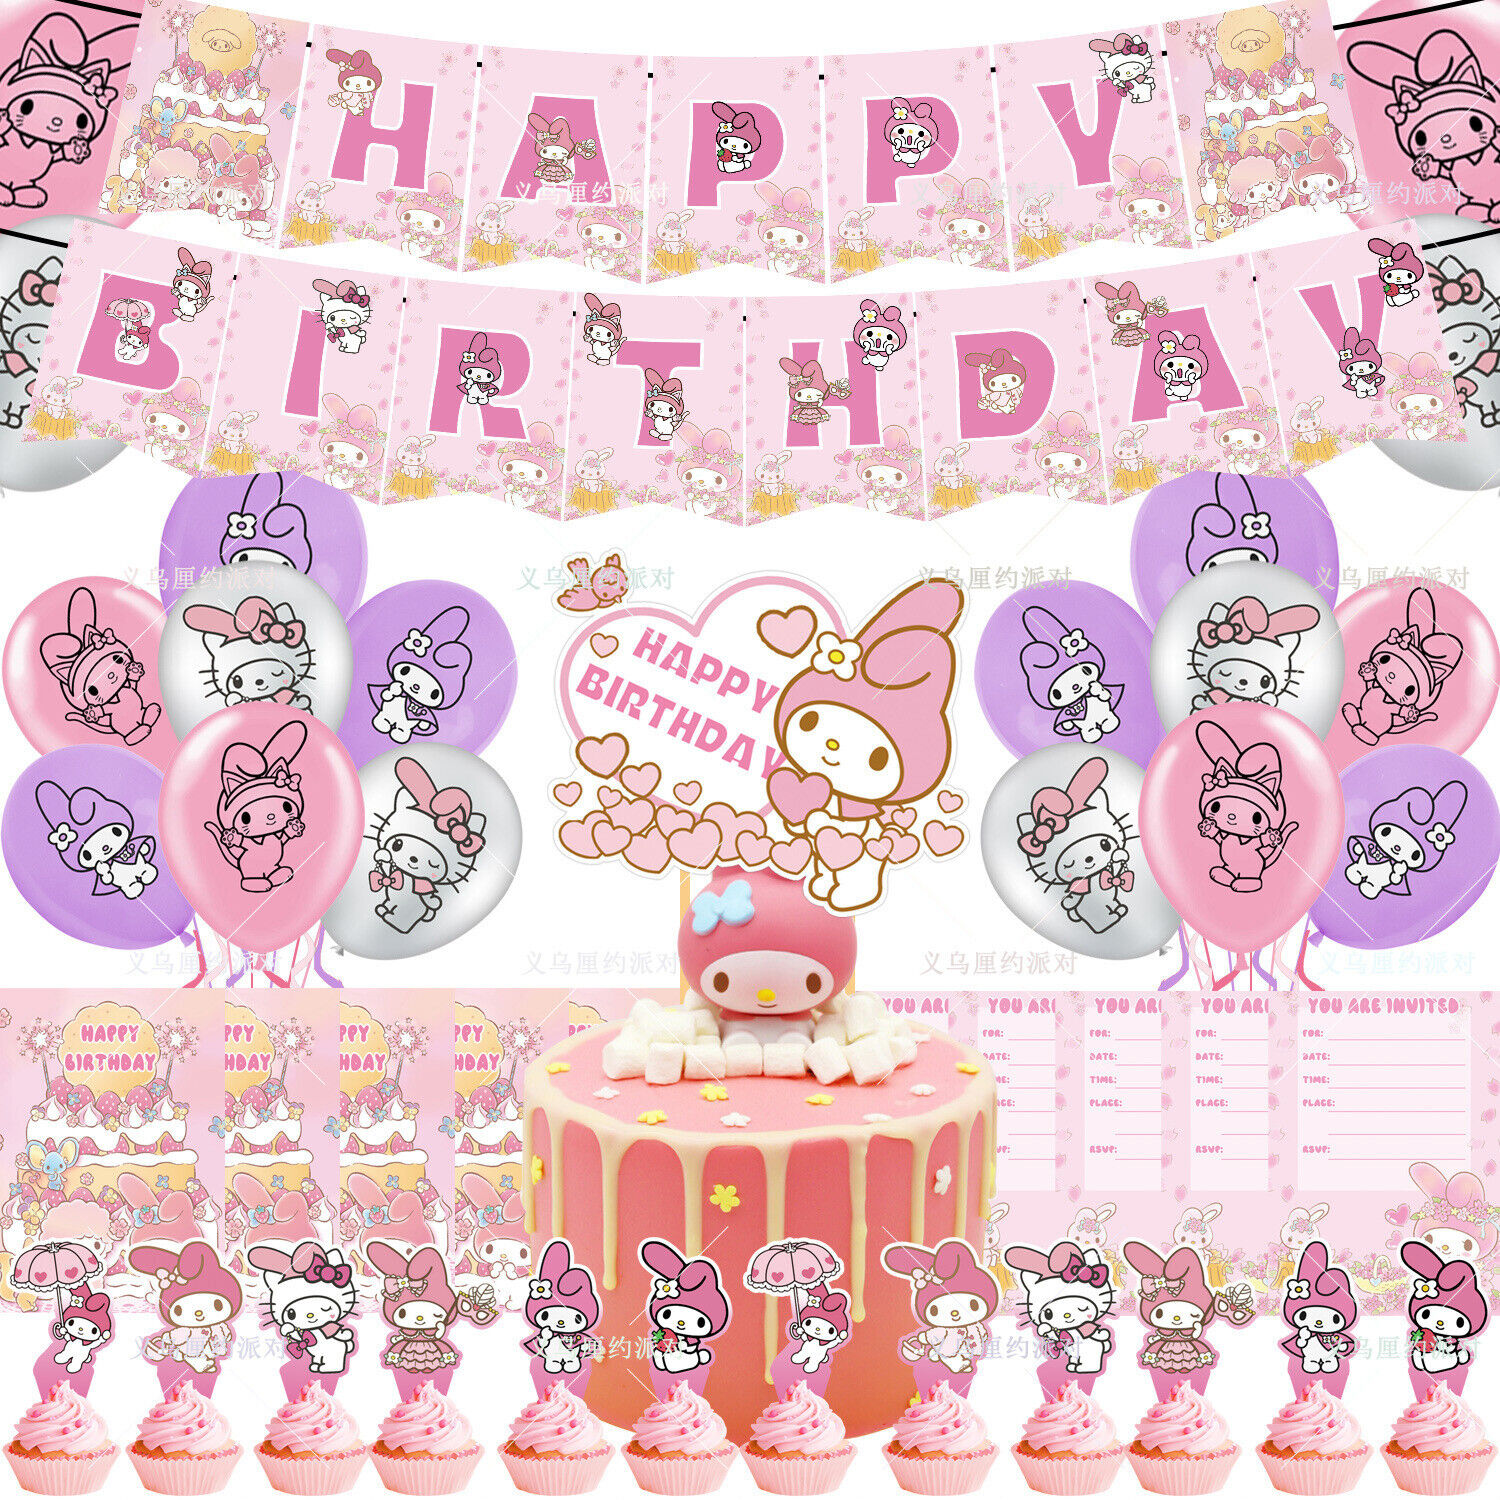 Cute Girl Gift My Melody Birthday Party Balloons Banner Cupcake Cake Toppers Set